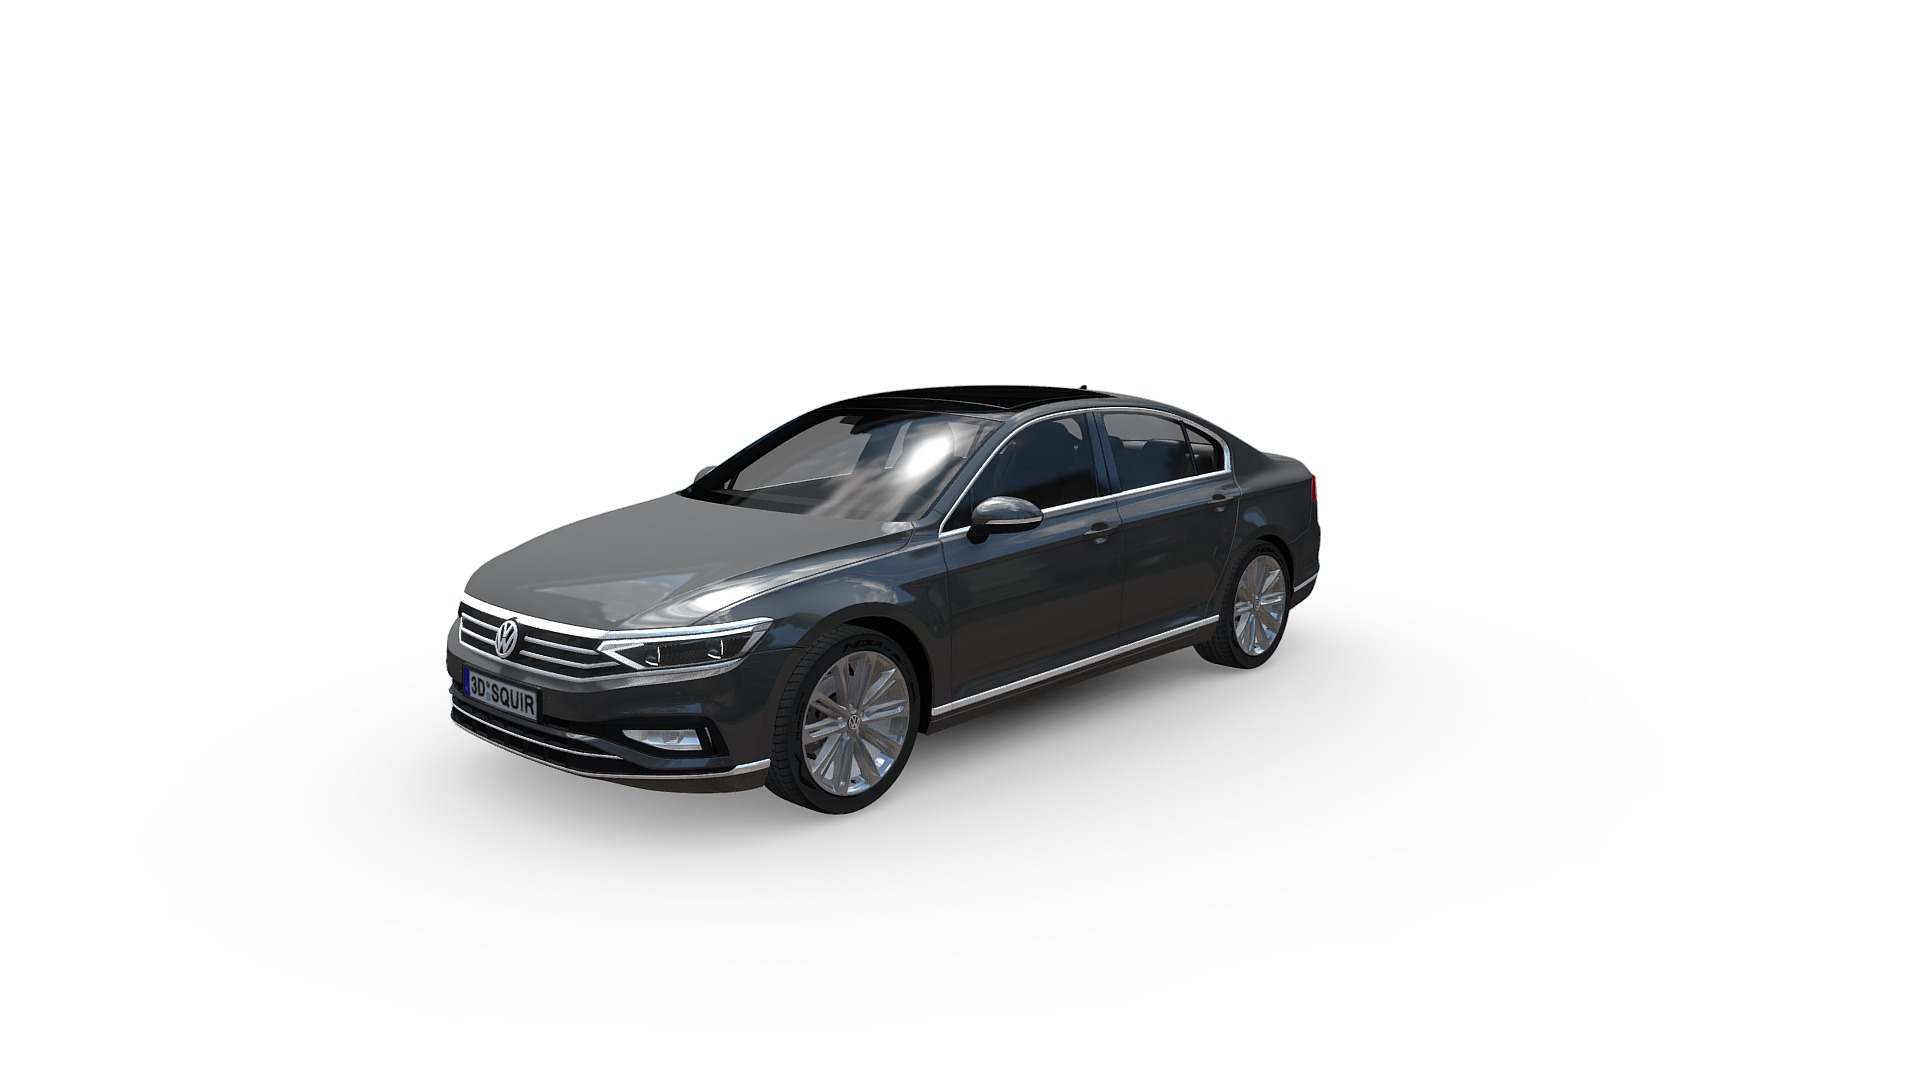 3D model Volkswagen Passat 2020 - This is a 3D model of the Volkswagen Passat 2020. The 3D model is about a black car with a white background.